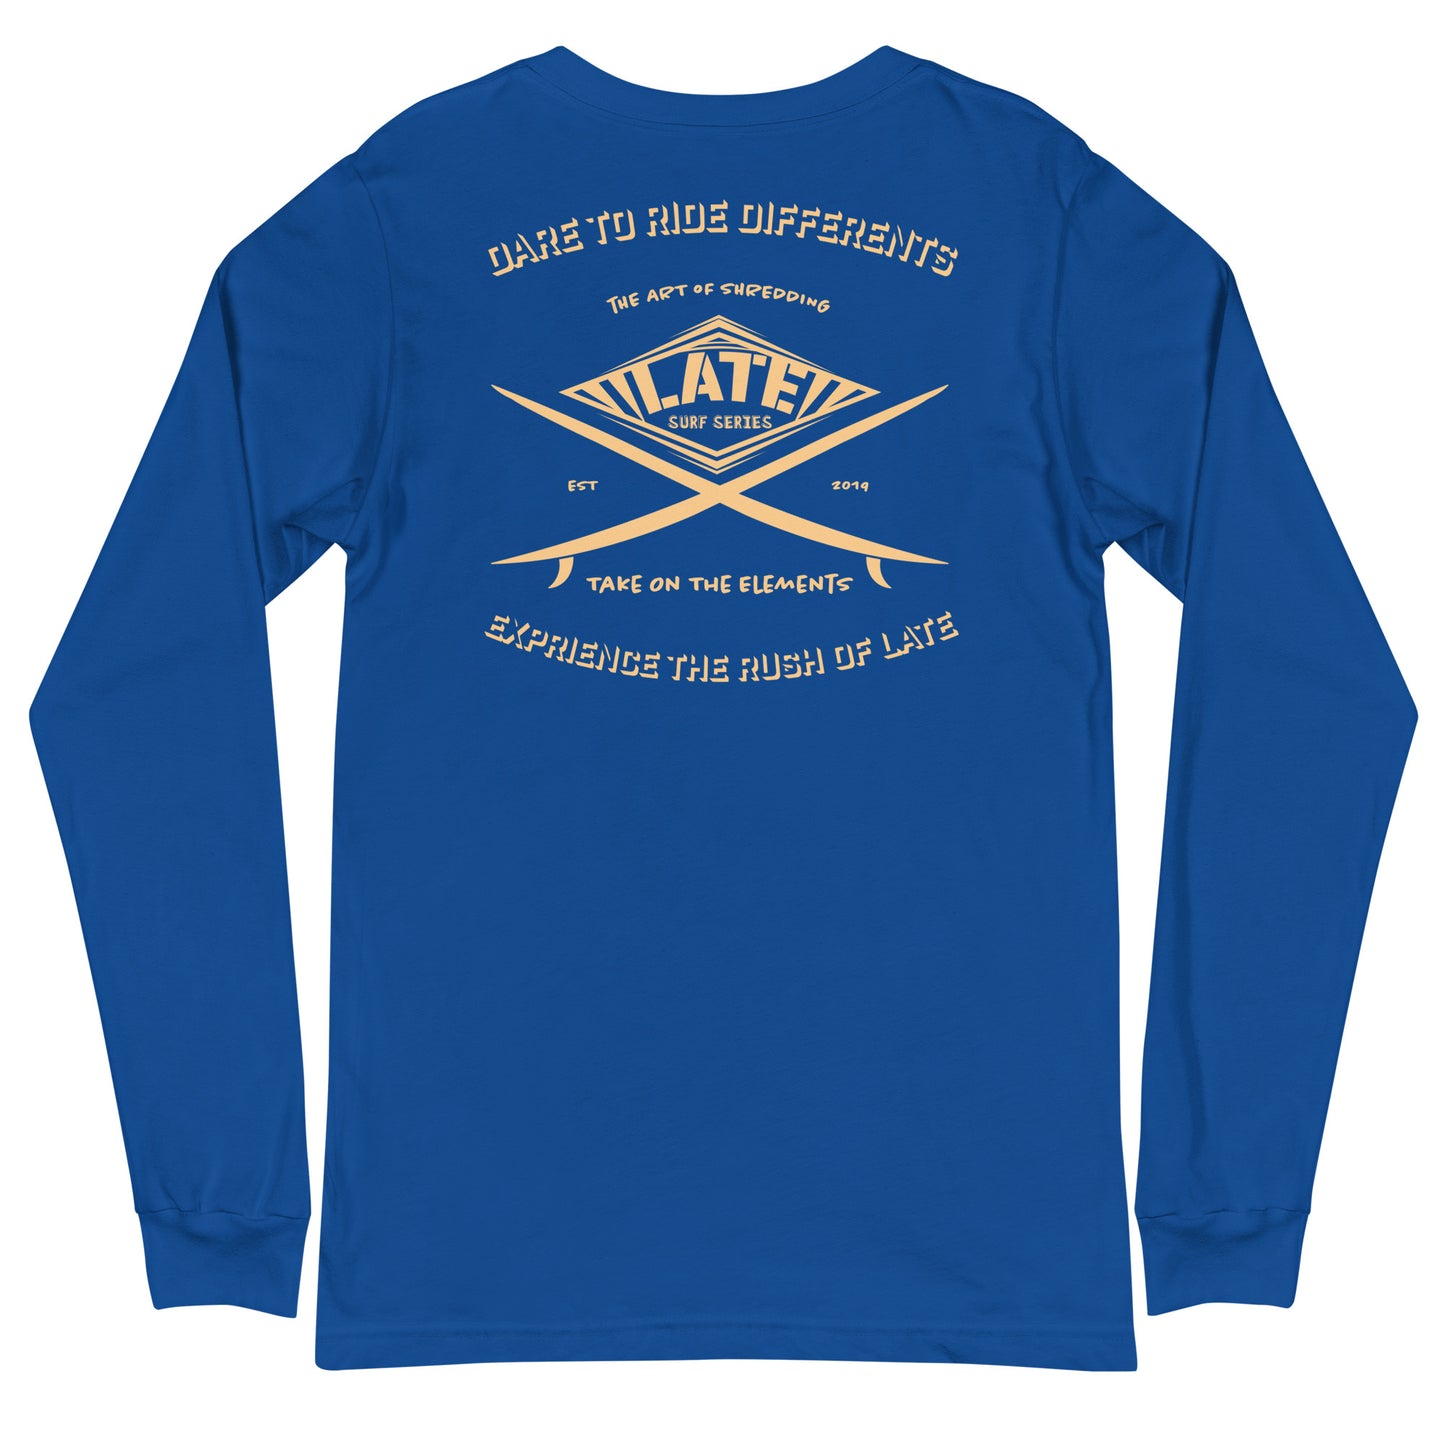 Long Sleeve surf vintage Take On The Elements Logo Late surf series, texte dare to ride differents couleur bleu